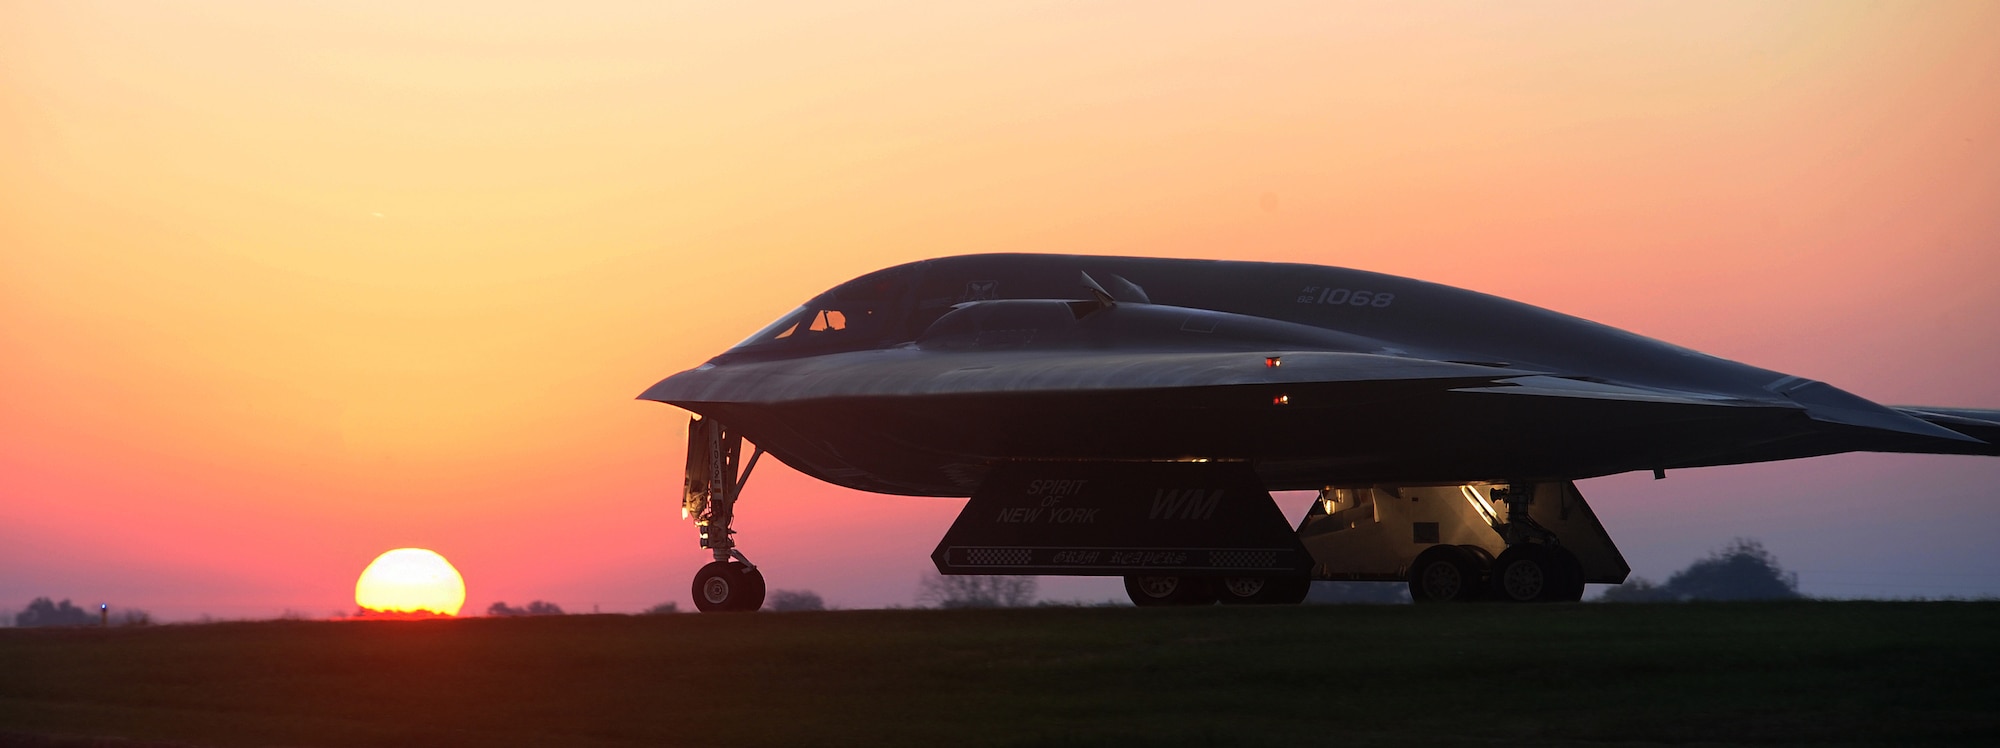 A B-2 Spirit bomber taxis on a flight line during Exercise Global Thunder 15. The B-2 is one of the key aircraft used to support U.S. Strategic Command’s global strike and bomber assurance and deterrence missions. Its stealth capabilities provide U.S. decision makers the capability to deter strategic attacks and, if necessary, penetrate the most secure defense systems to rapidly deliver its payload when called upon by the President and Secretary of Defense. (U.S. Air Force photo by Airman 1st Class Joel Pfiester/Released)